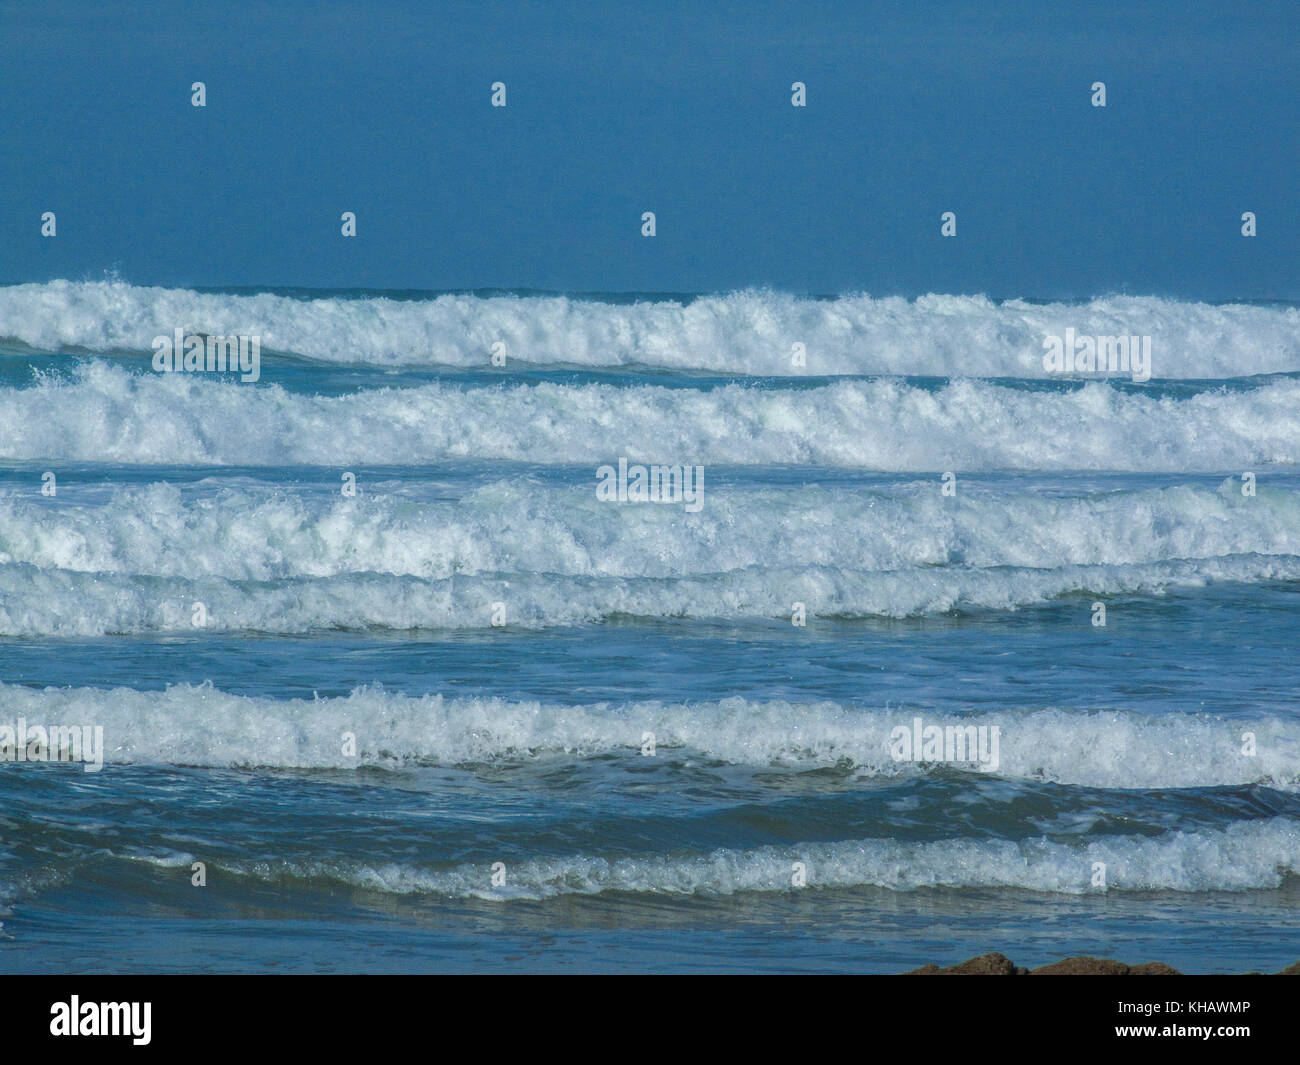 Rolling wave breakers off the shoreline at Newquay, Cornwall. Stock Photo